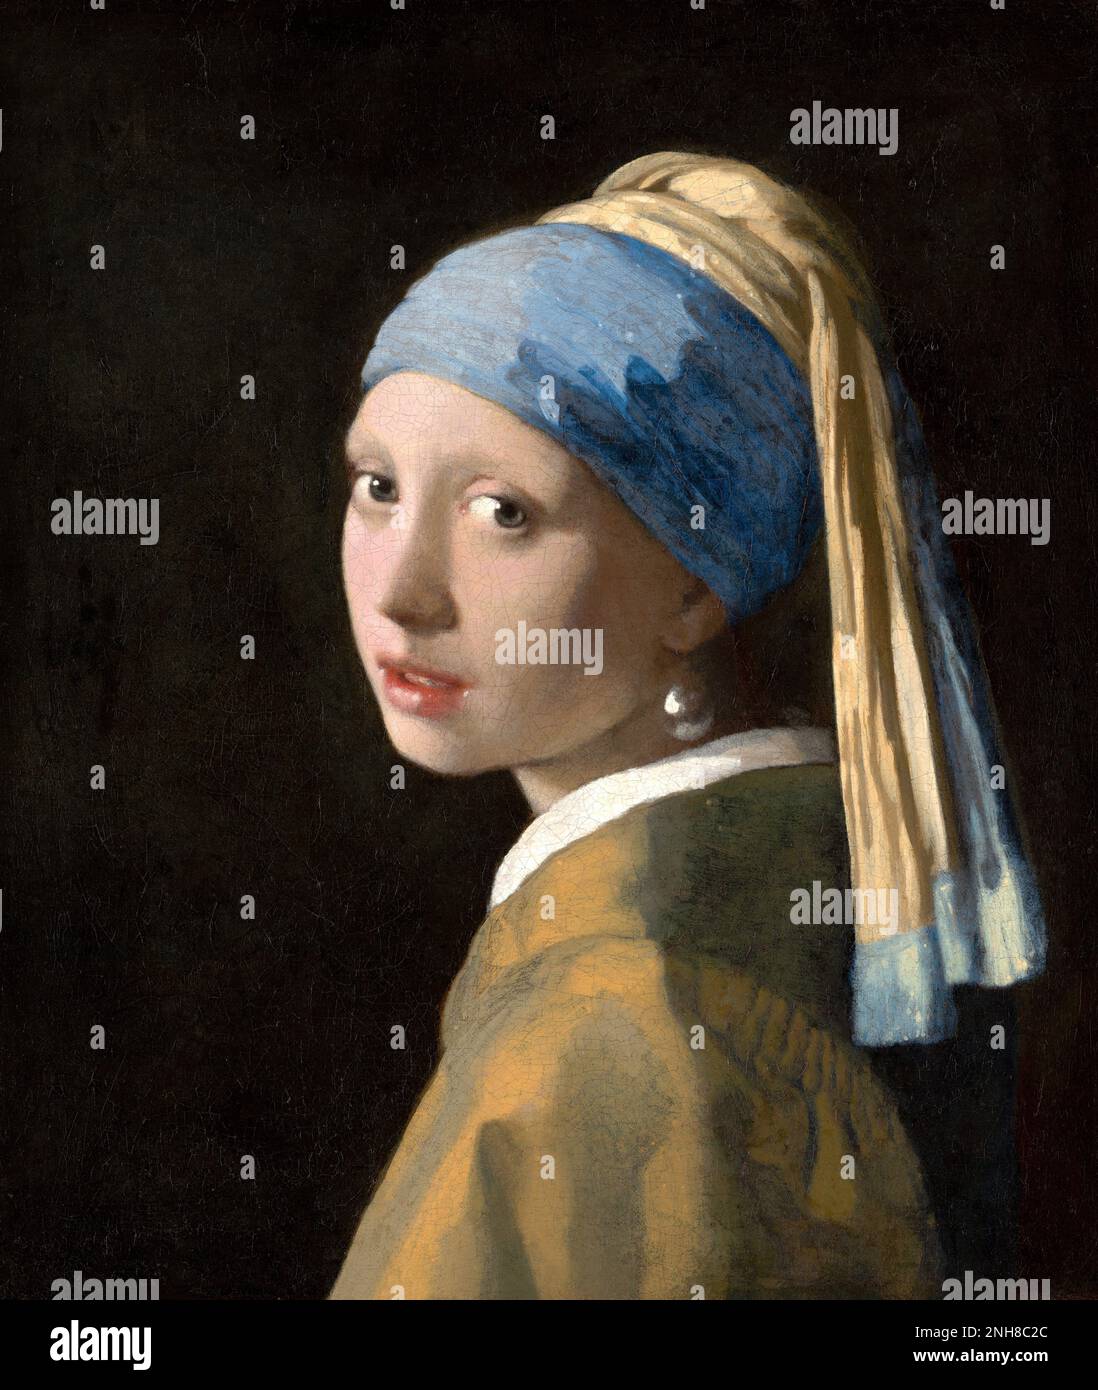 Girl With A Pearl Earring is an oil painting by Dutch Golden Age painter Johannes Vermeer, dated c. 1665. Going by various names over the centuries, it became known by its present title towards the end of the 20th century after the earring worn by the girl portrayed there. Stock Photo